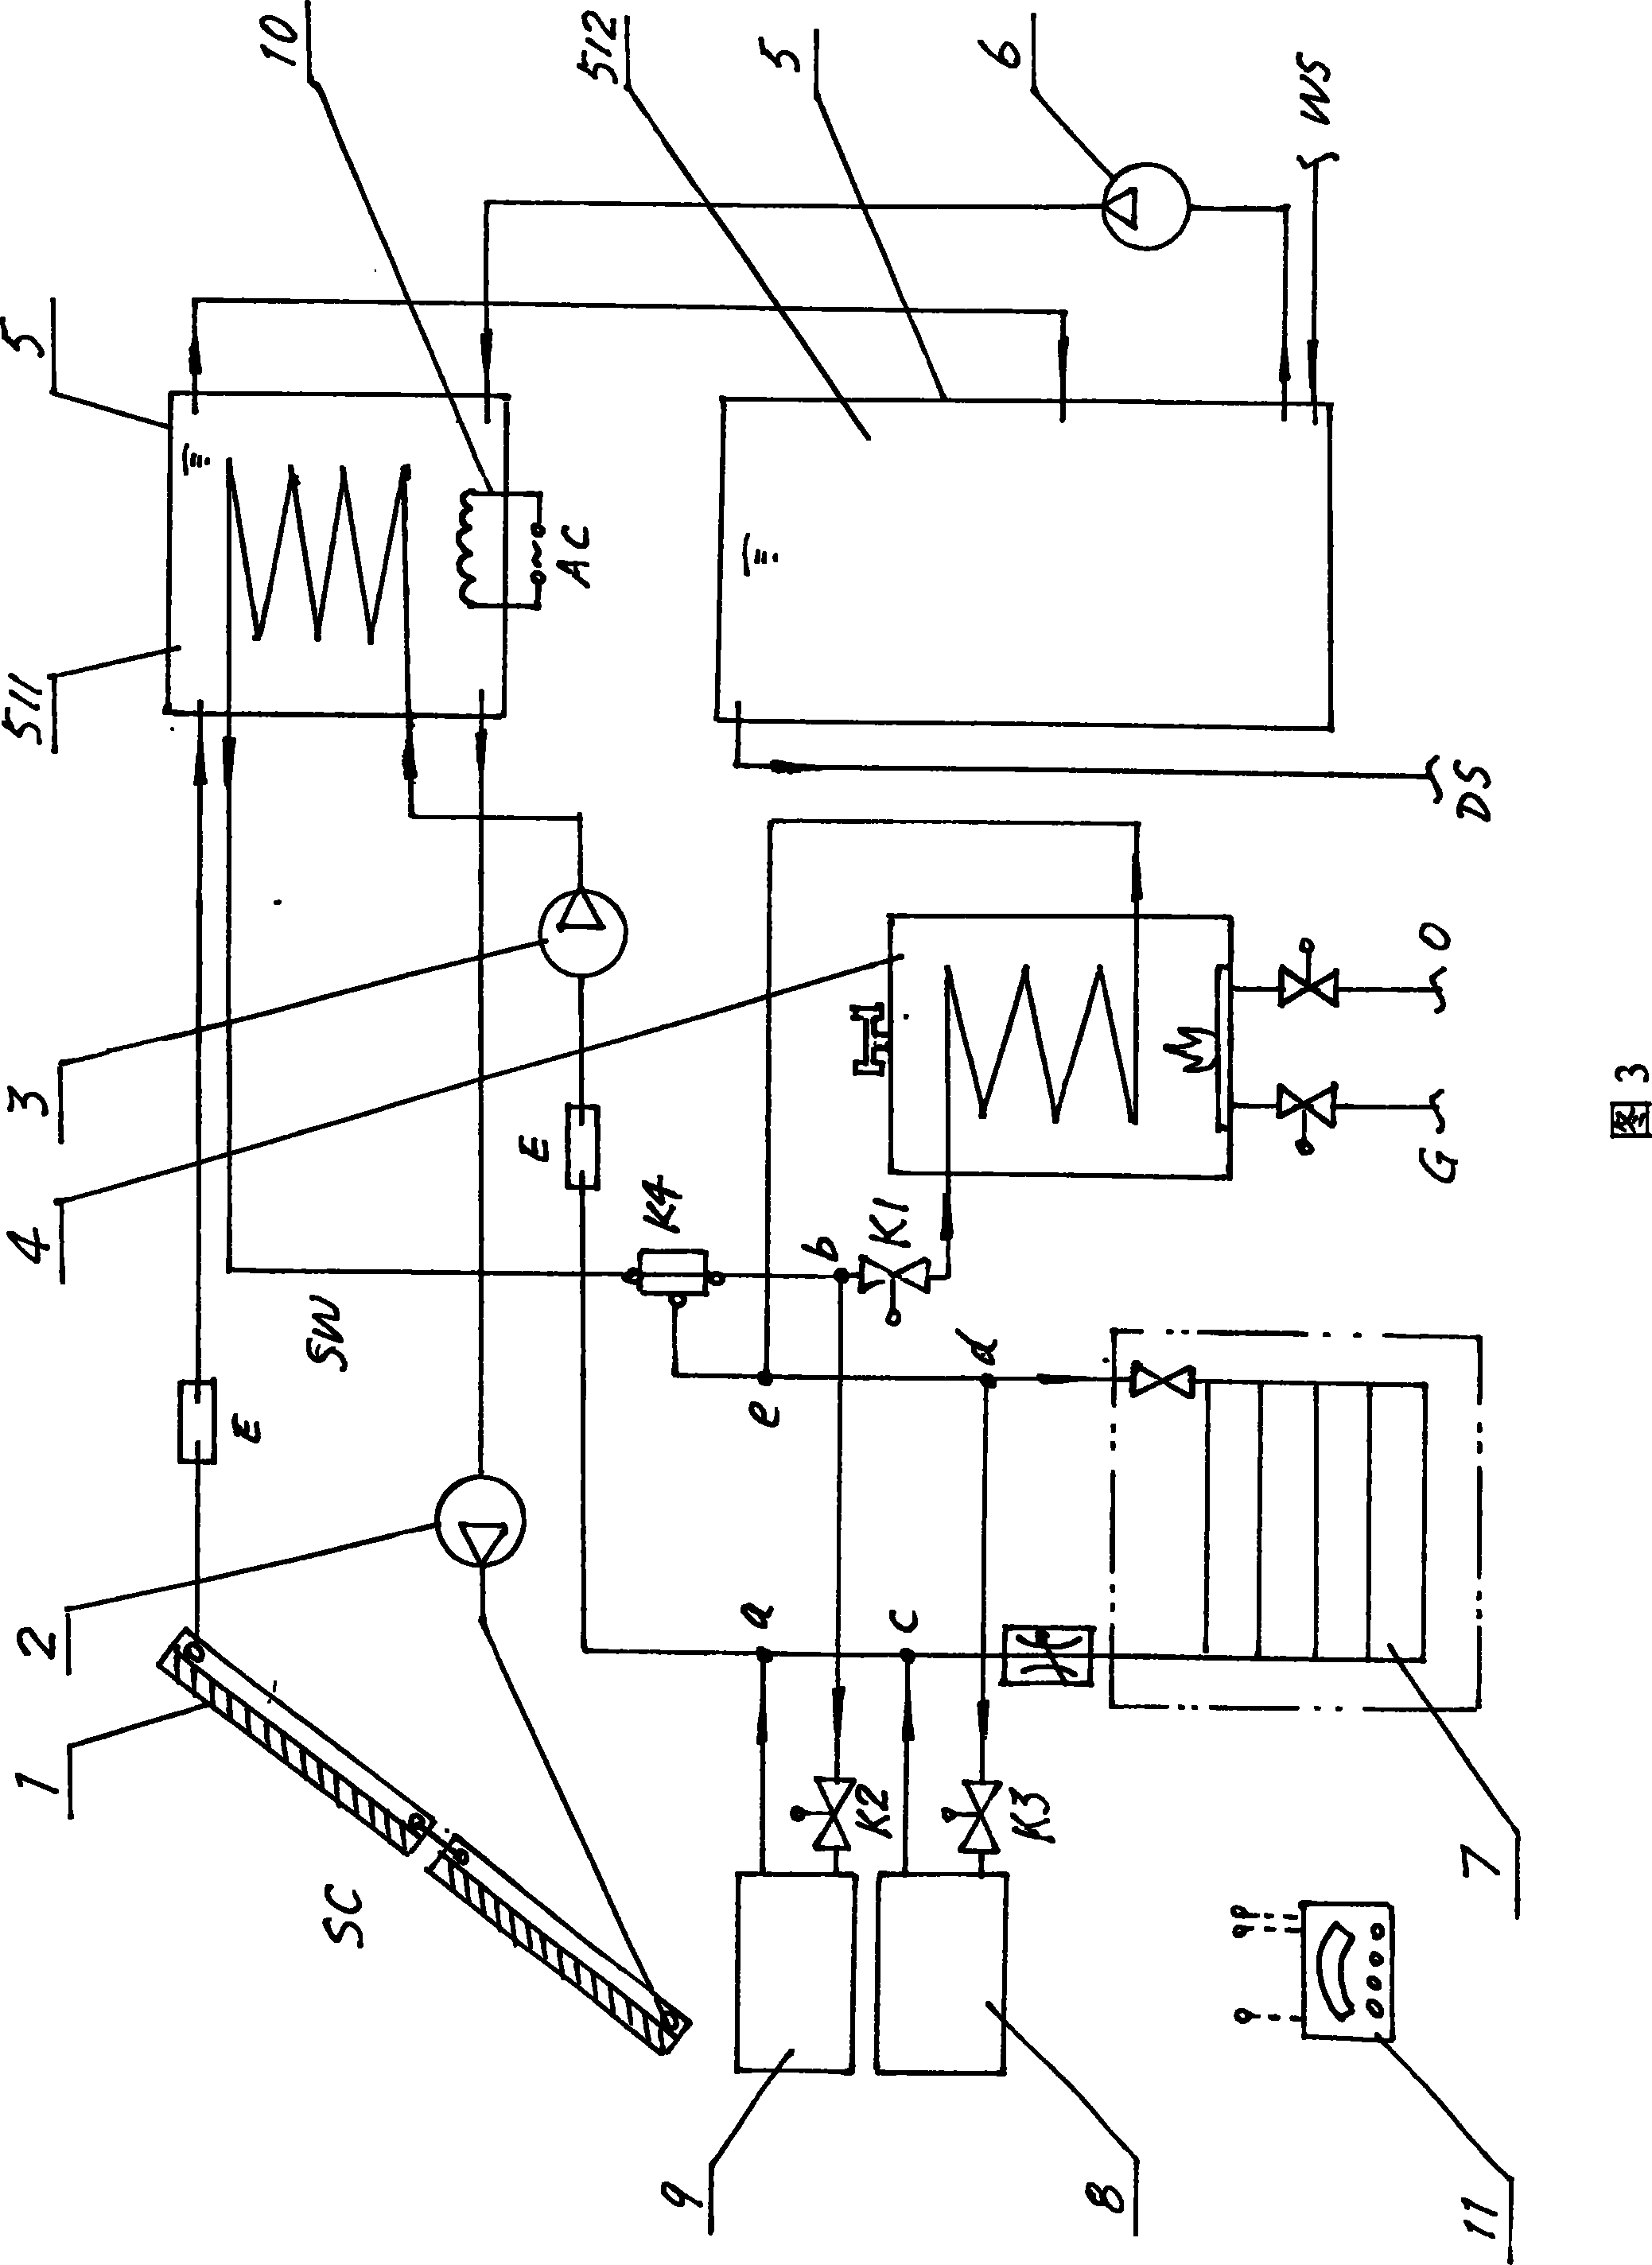 Solar water-heating and air-conditioning heating system employing gas or oil to aid heating